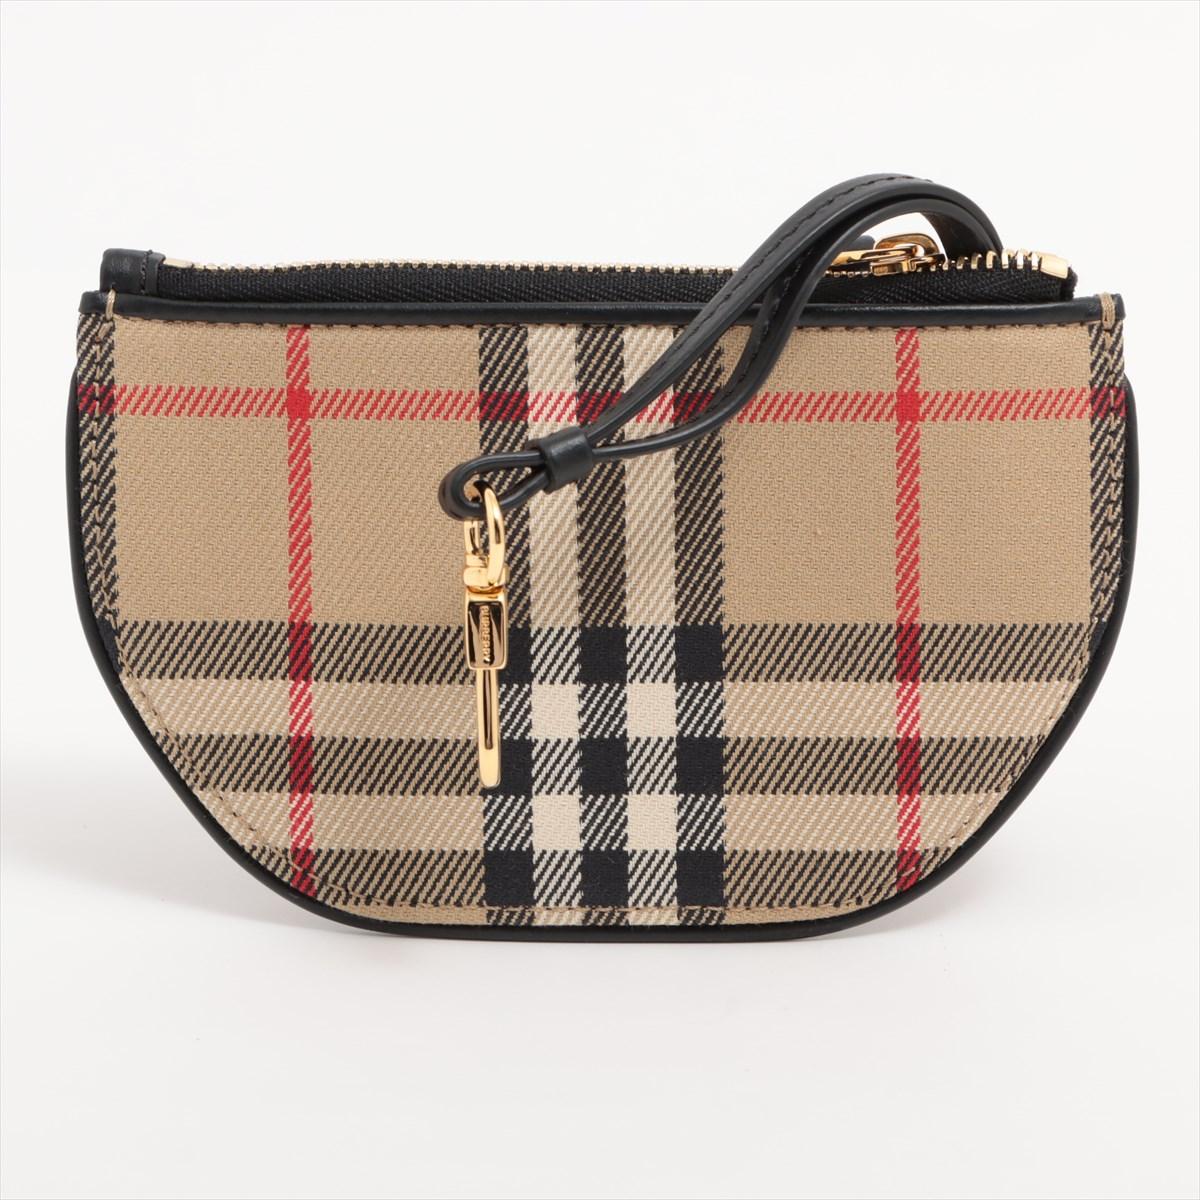 Burberry Nova Check Coin Purse Beige In Good Condition For Sale In Indianapolis, IN